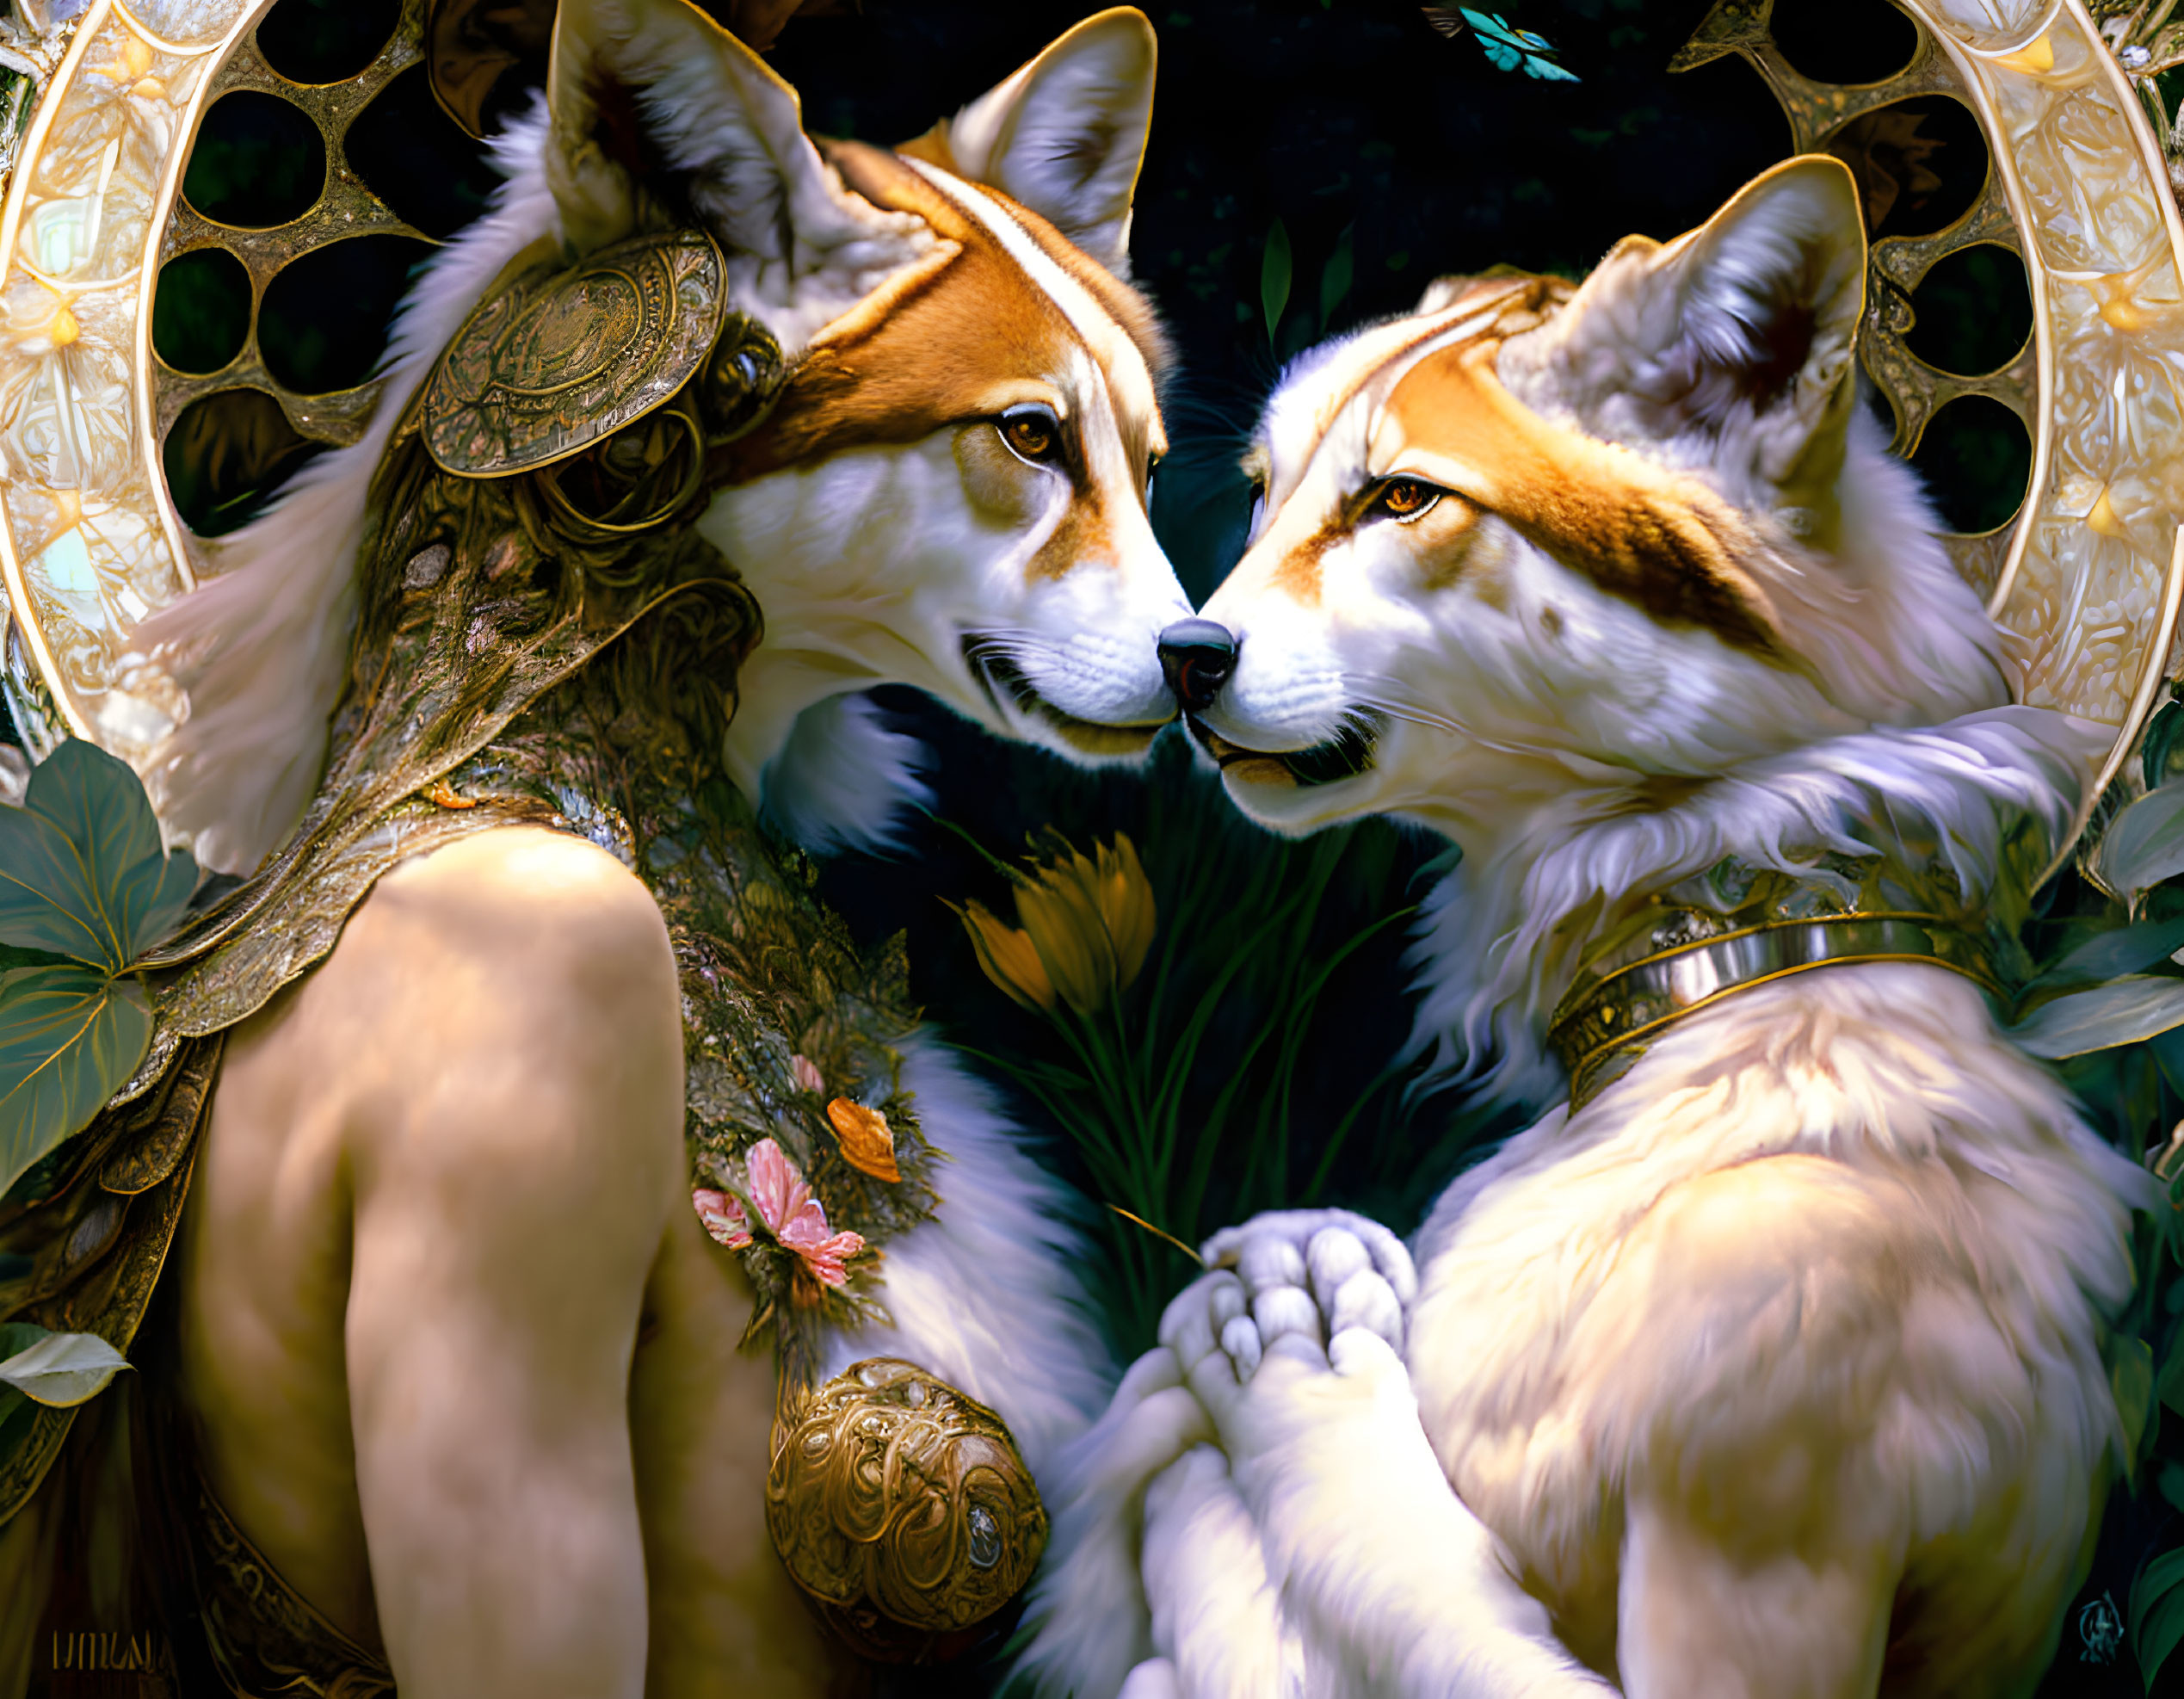 Anthropomorphic foxes in elaborate costumes with ornate gold backdrop